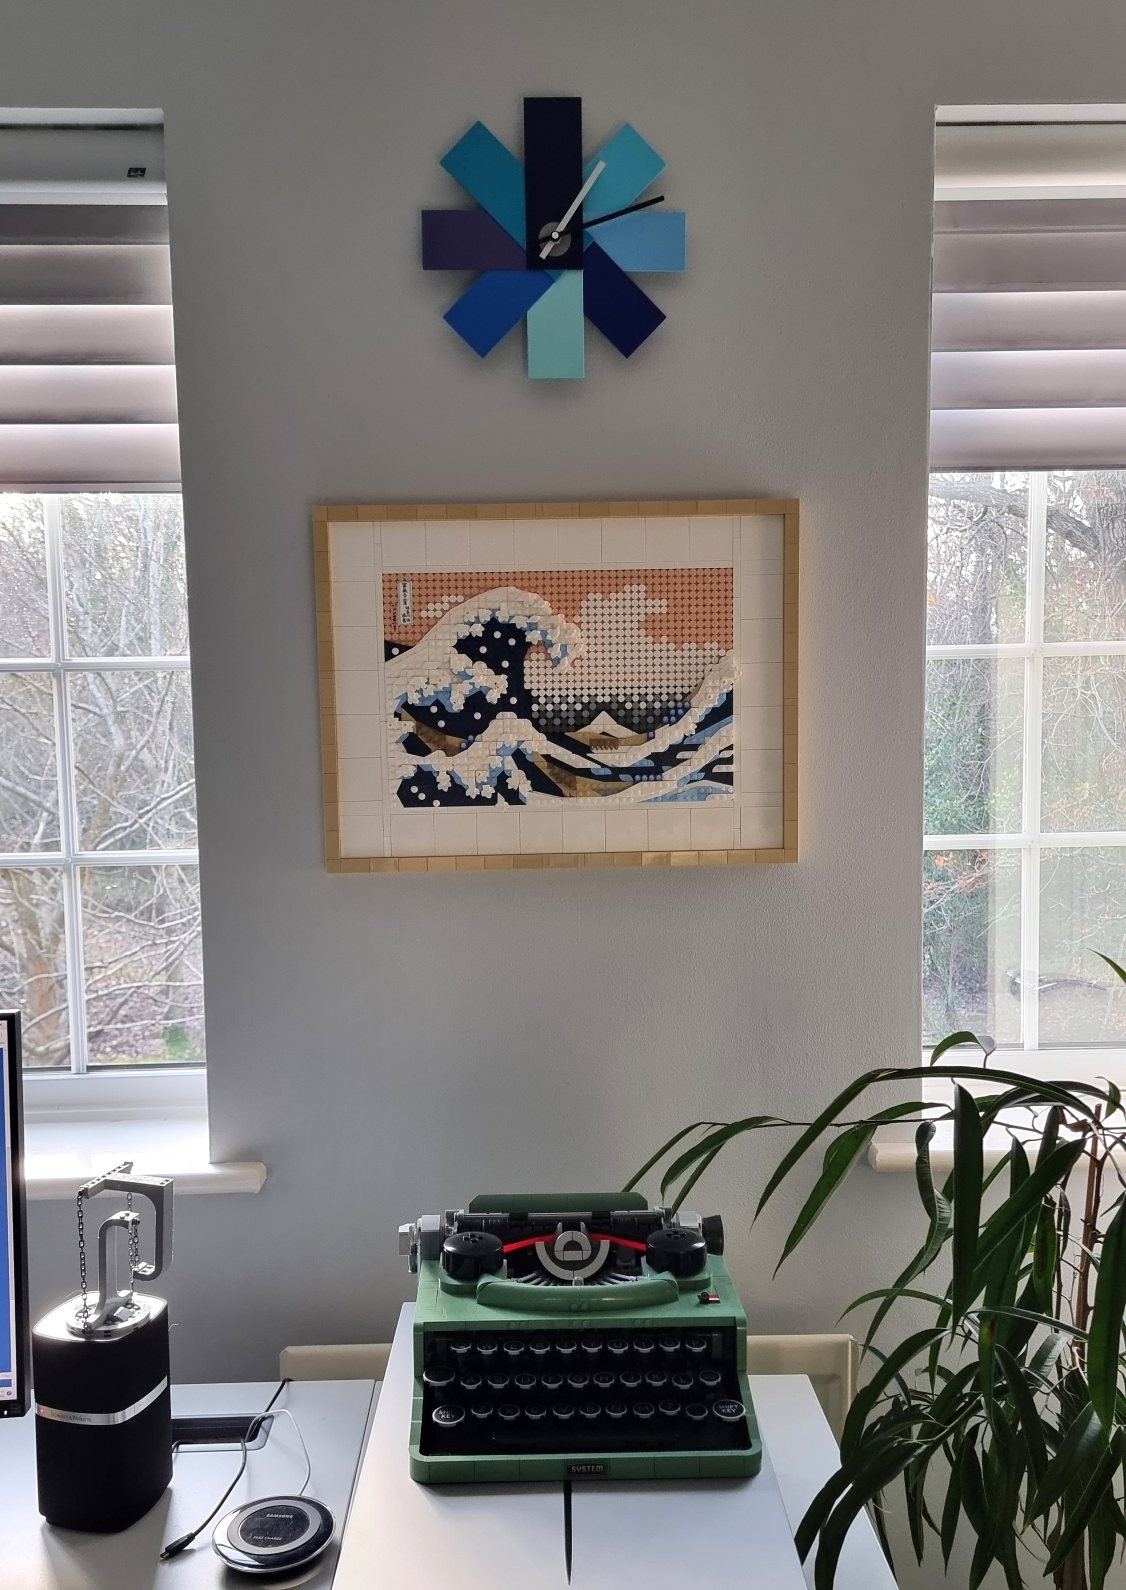 LEGO 31208 The Great Wave review